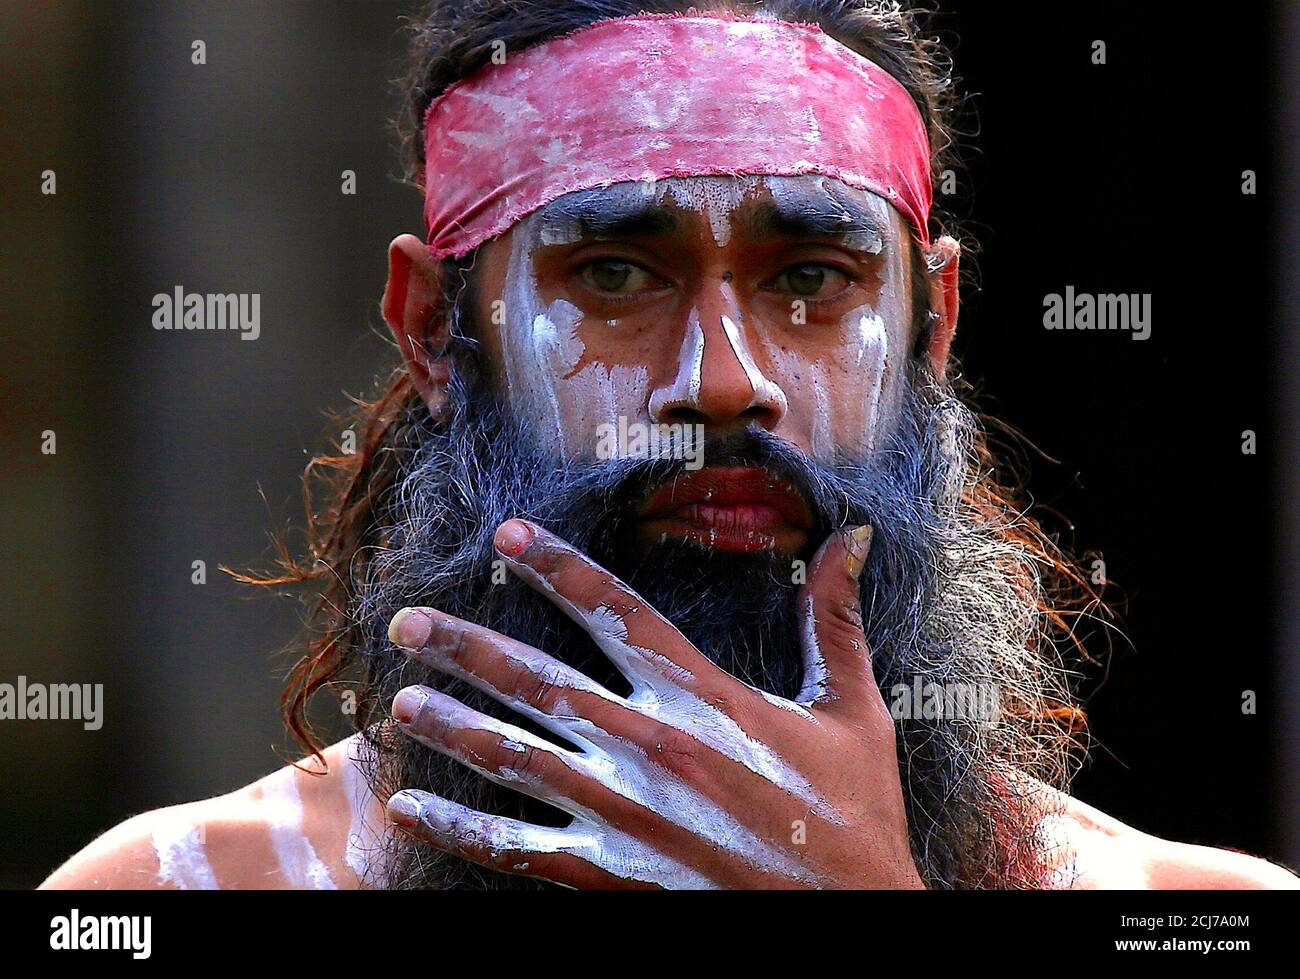 An Australian Aboriginal man wearing traditional dress prepares to perform  in a welcoming ceremony at Government House in Sydney, Australia, June 28,  2017. REUTERS/David Gray Stock Photo - Alamy